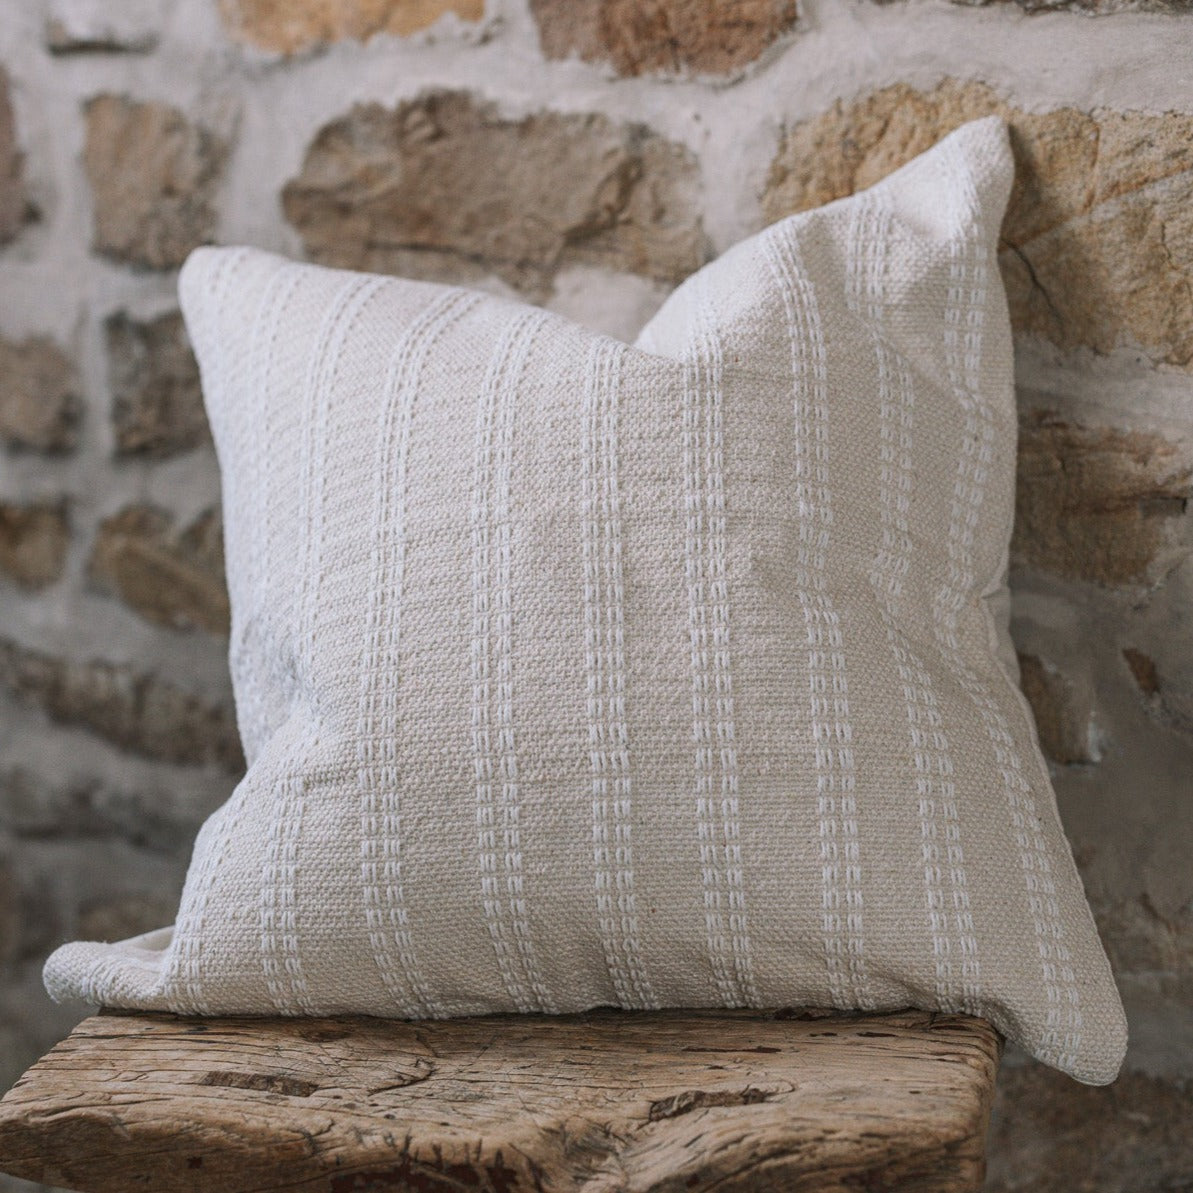 Cream and white stitch striped cushion on wooden stool against a stone wall.